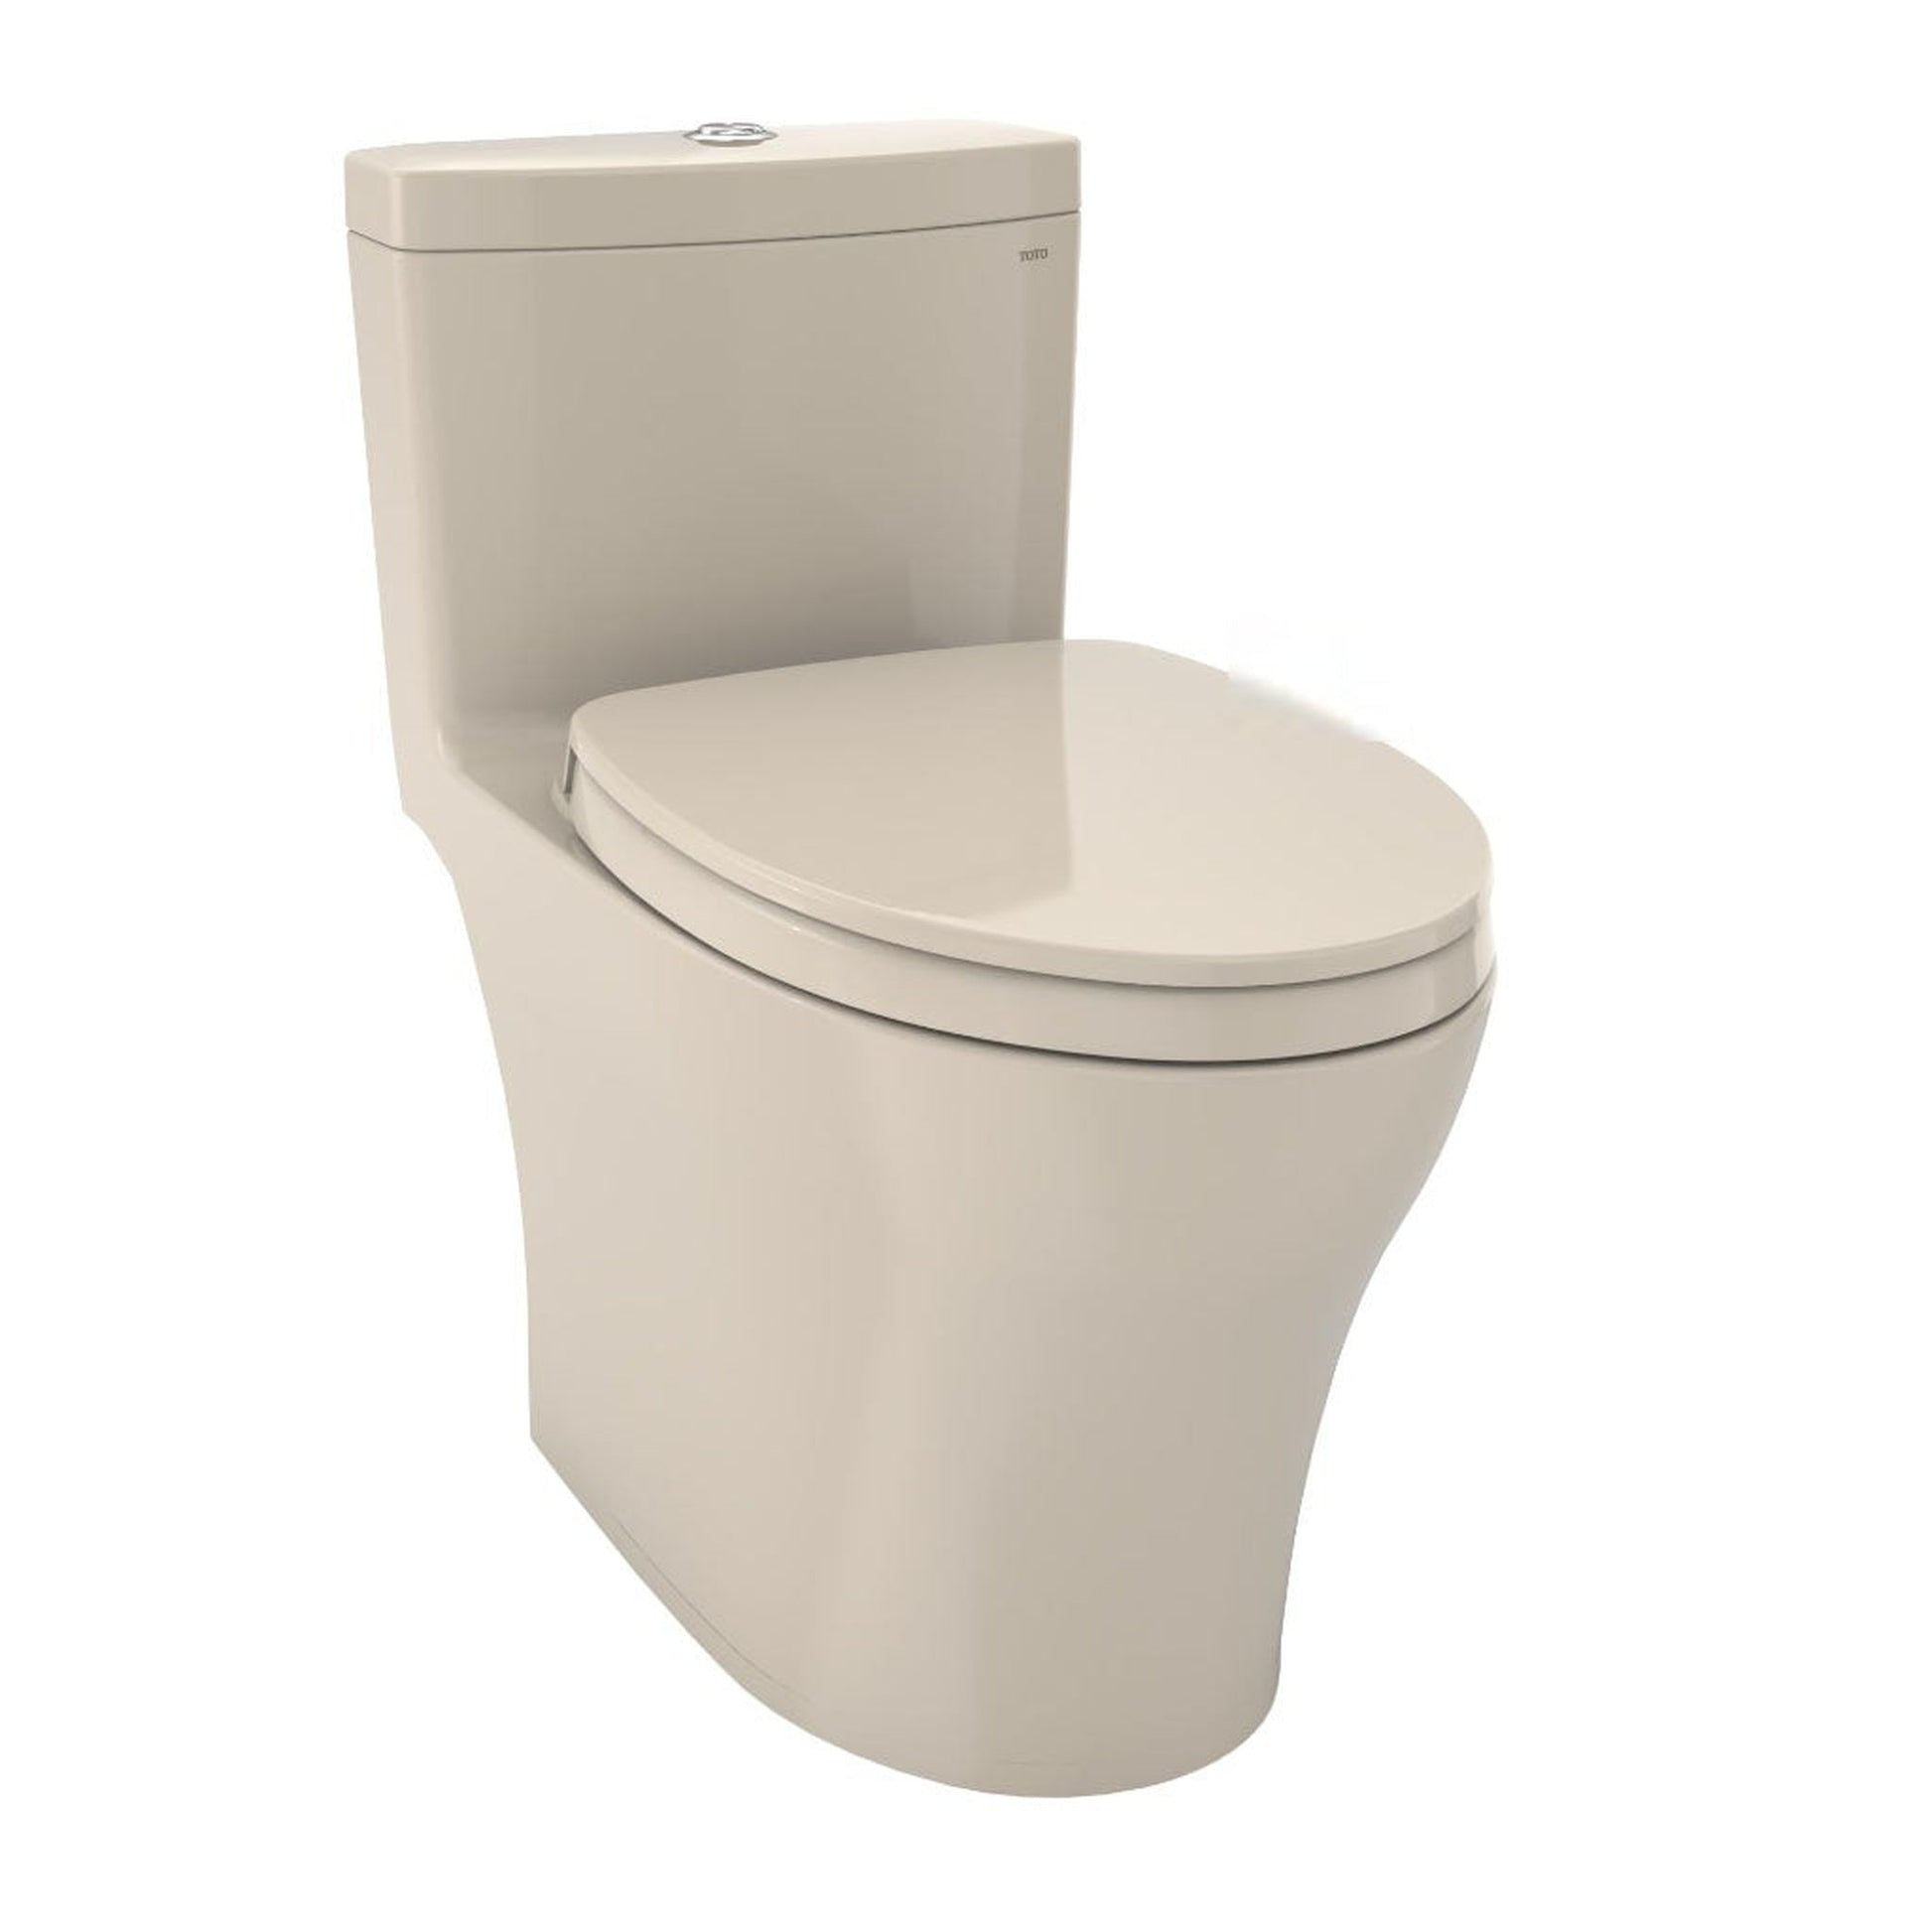 TOTO Aquia IV Bone One-Piece 0.8 GPF & 1.28 GPF Dual-Flush Elongated Toilet With WASHLET+ Connection - Seat Included